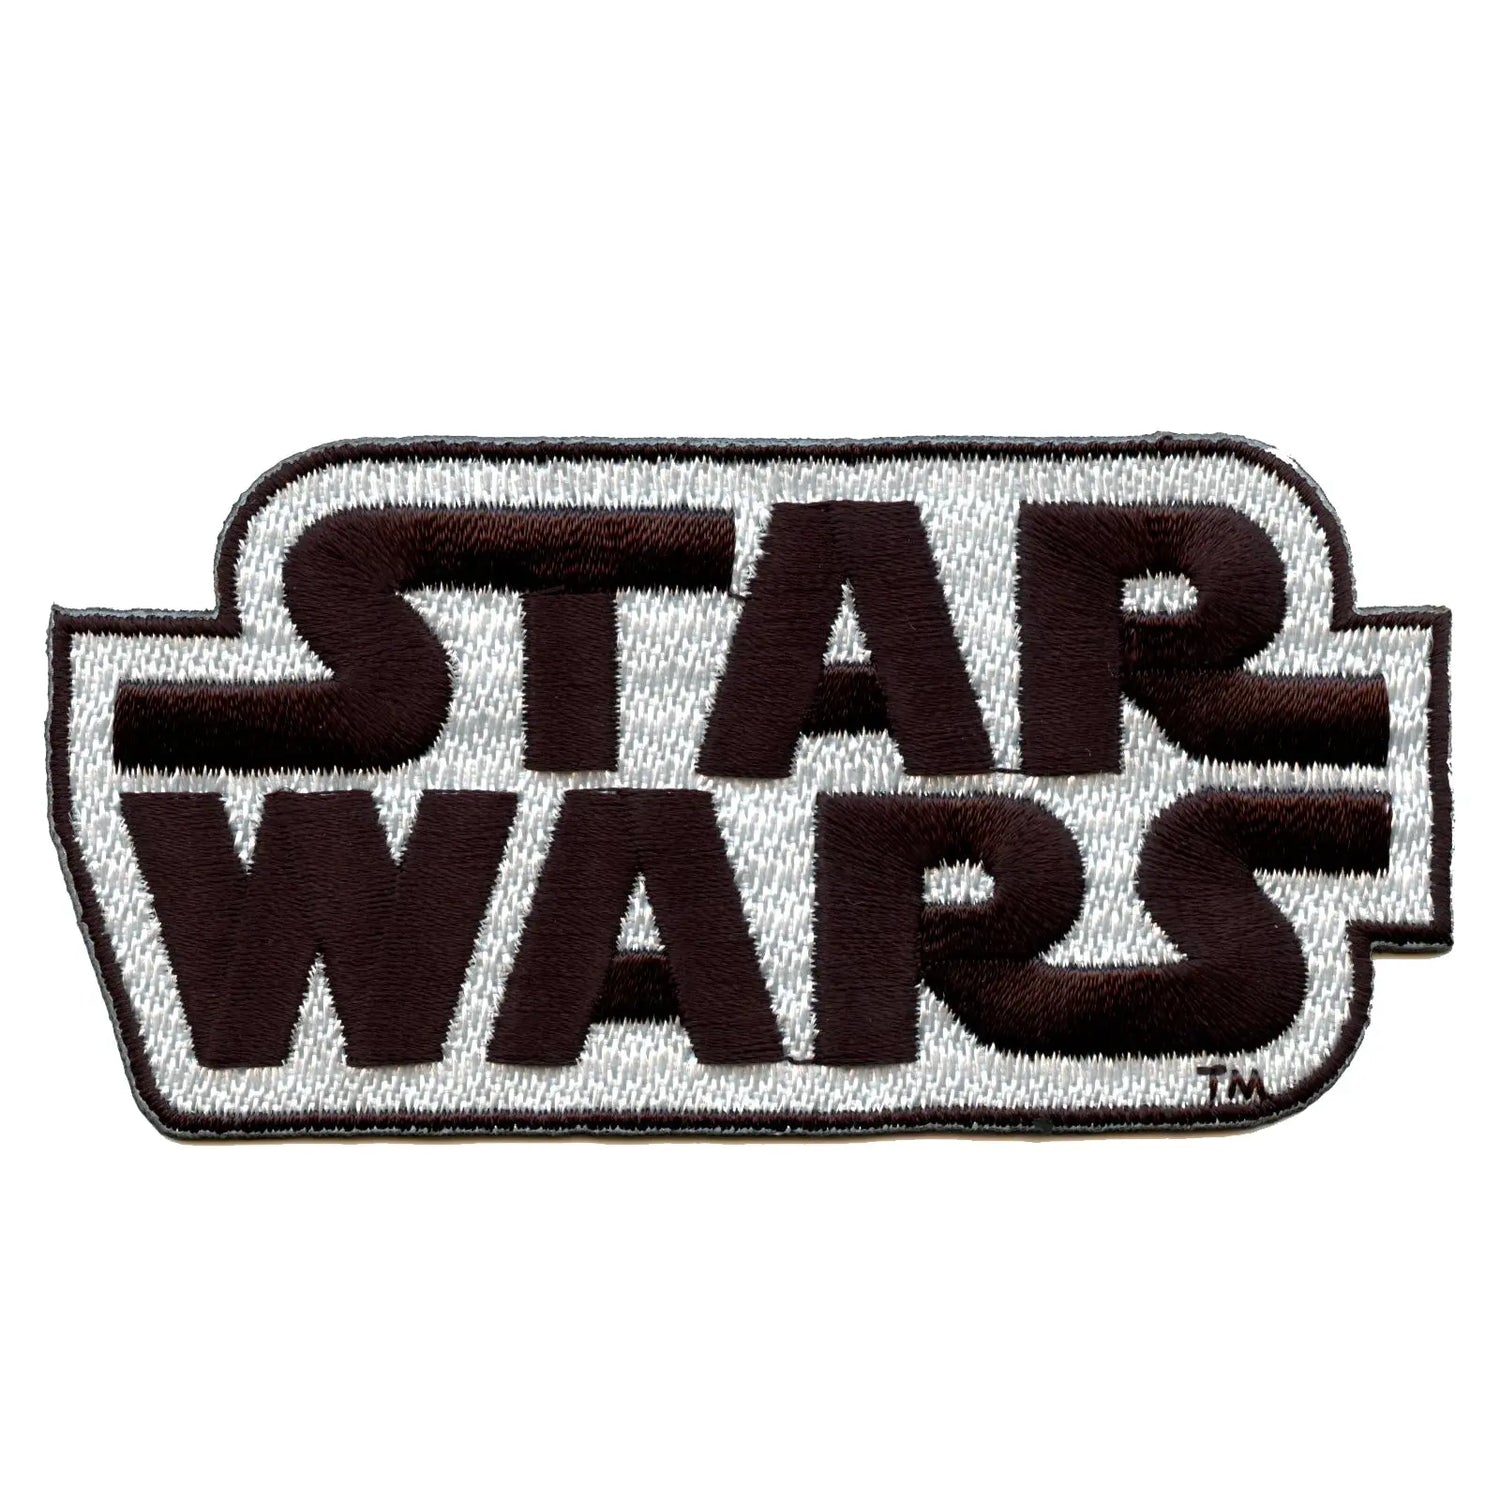 Star Wars Iron-on Patches